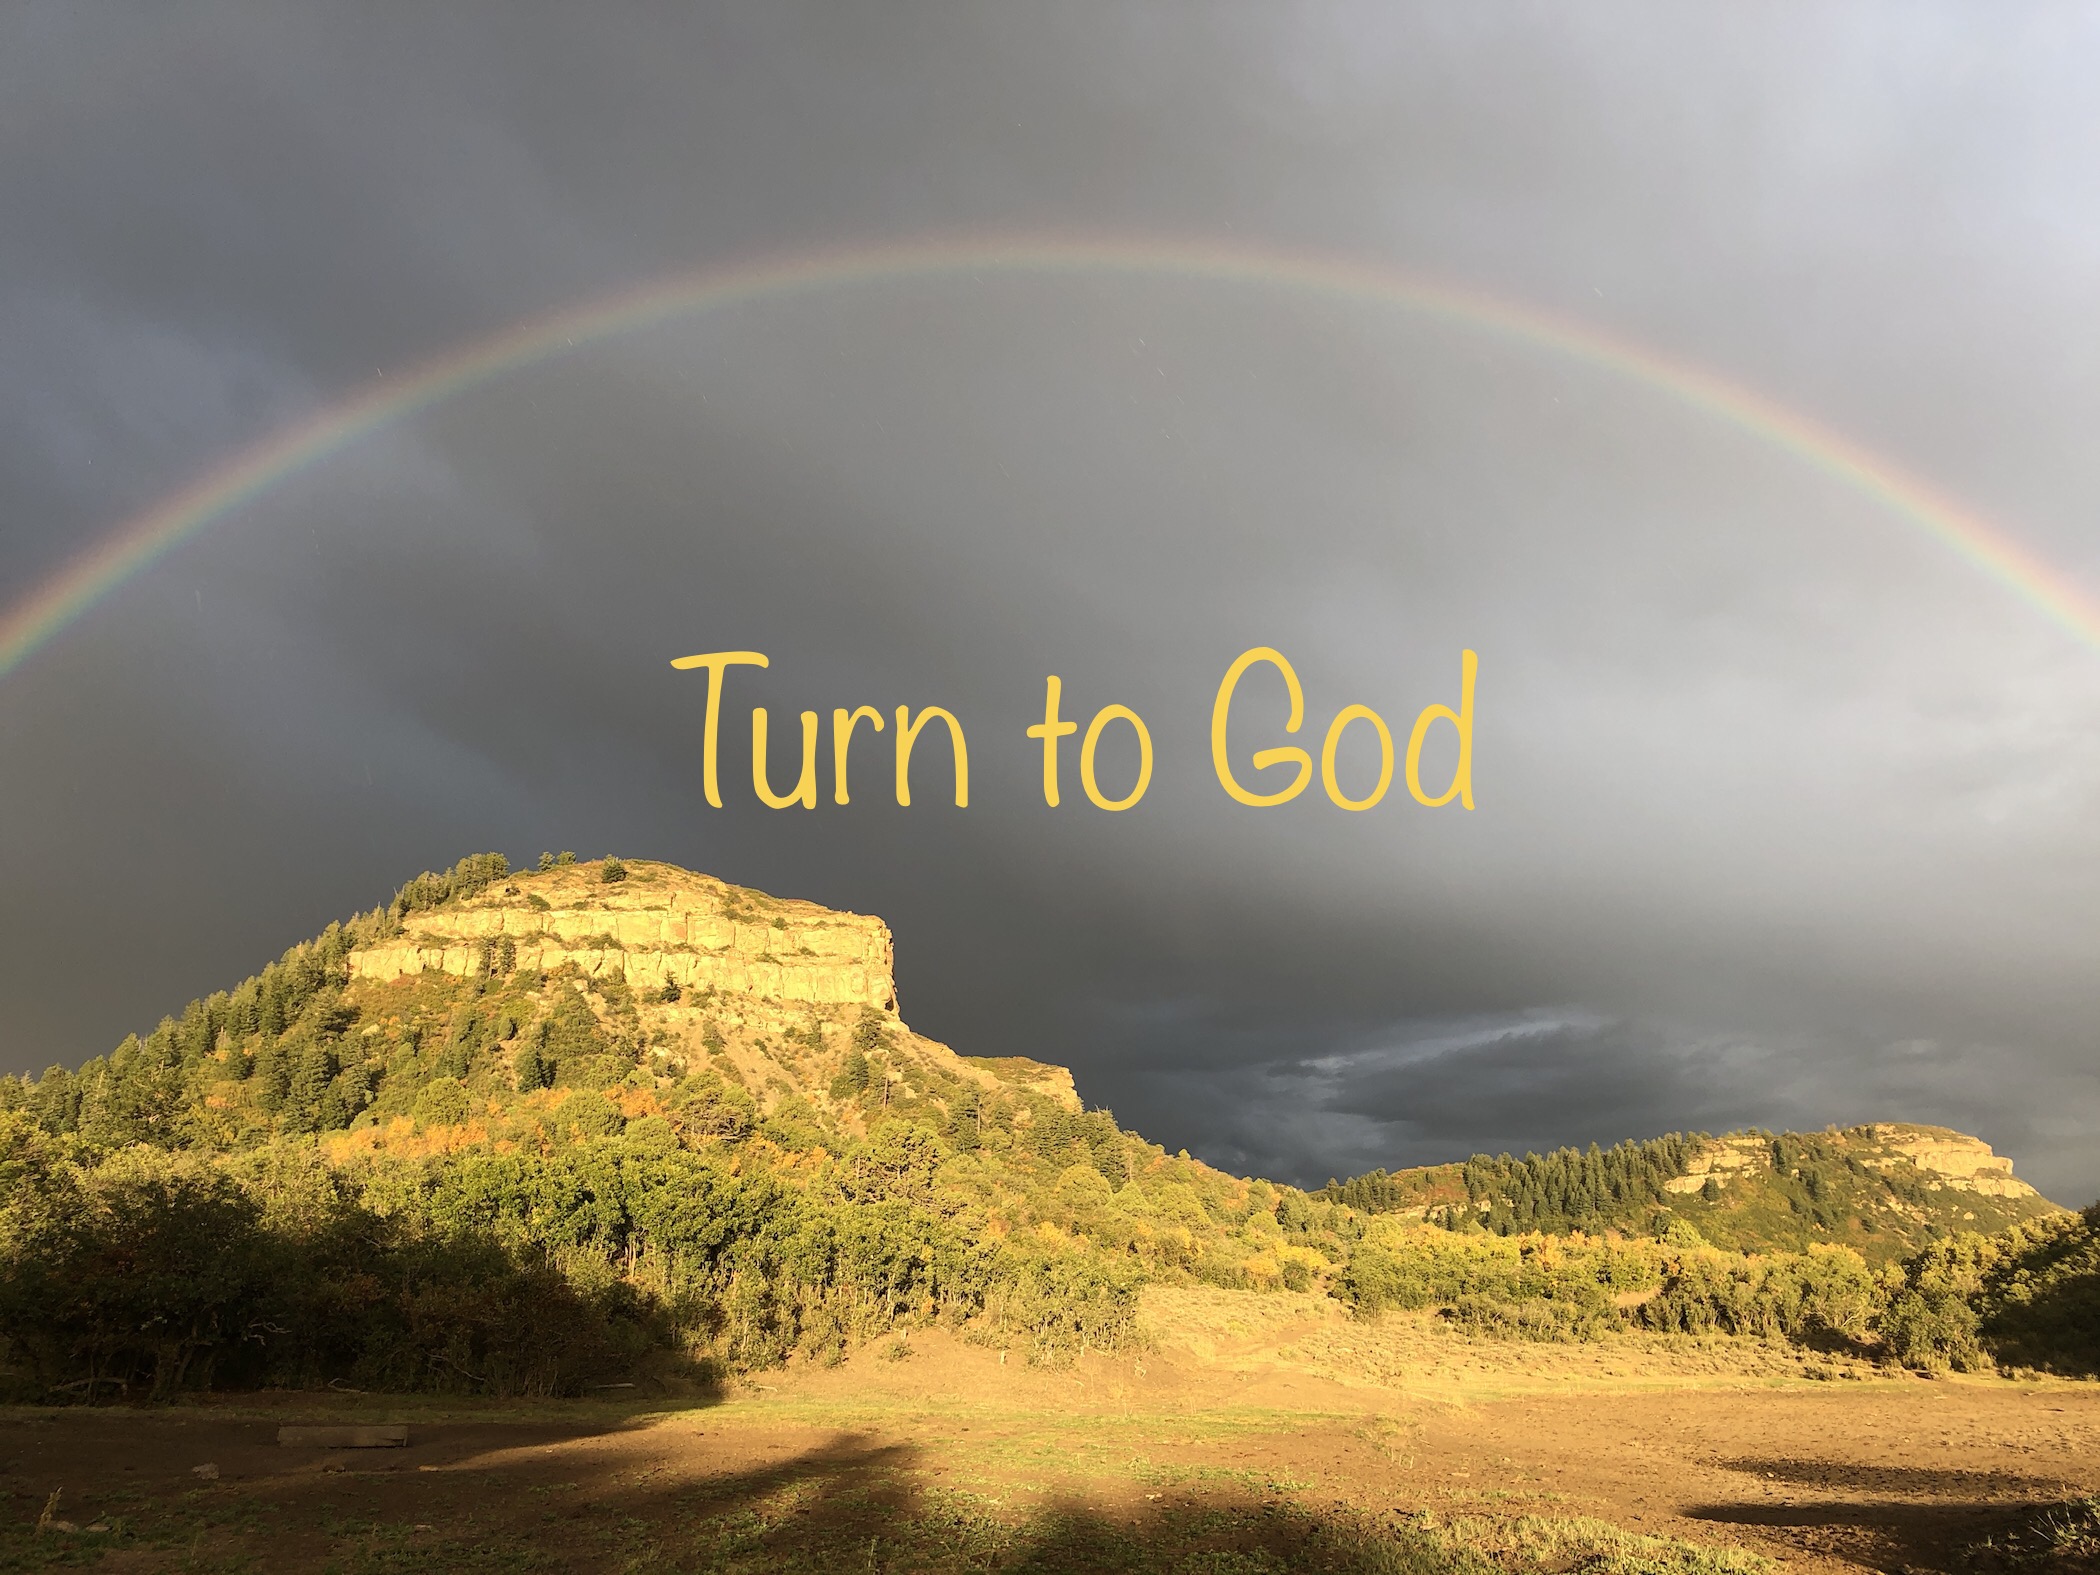 Day 3 of 2020…Turn to God